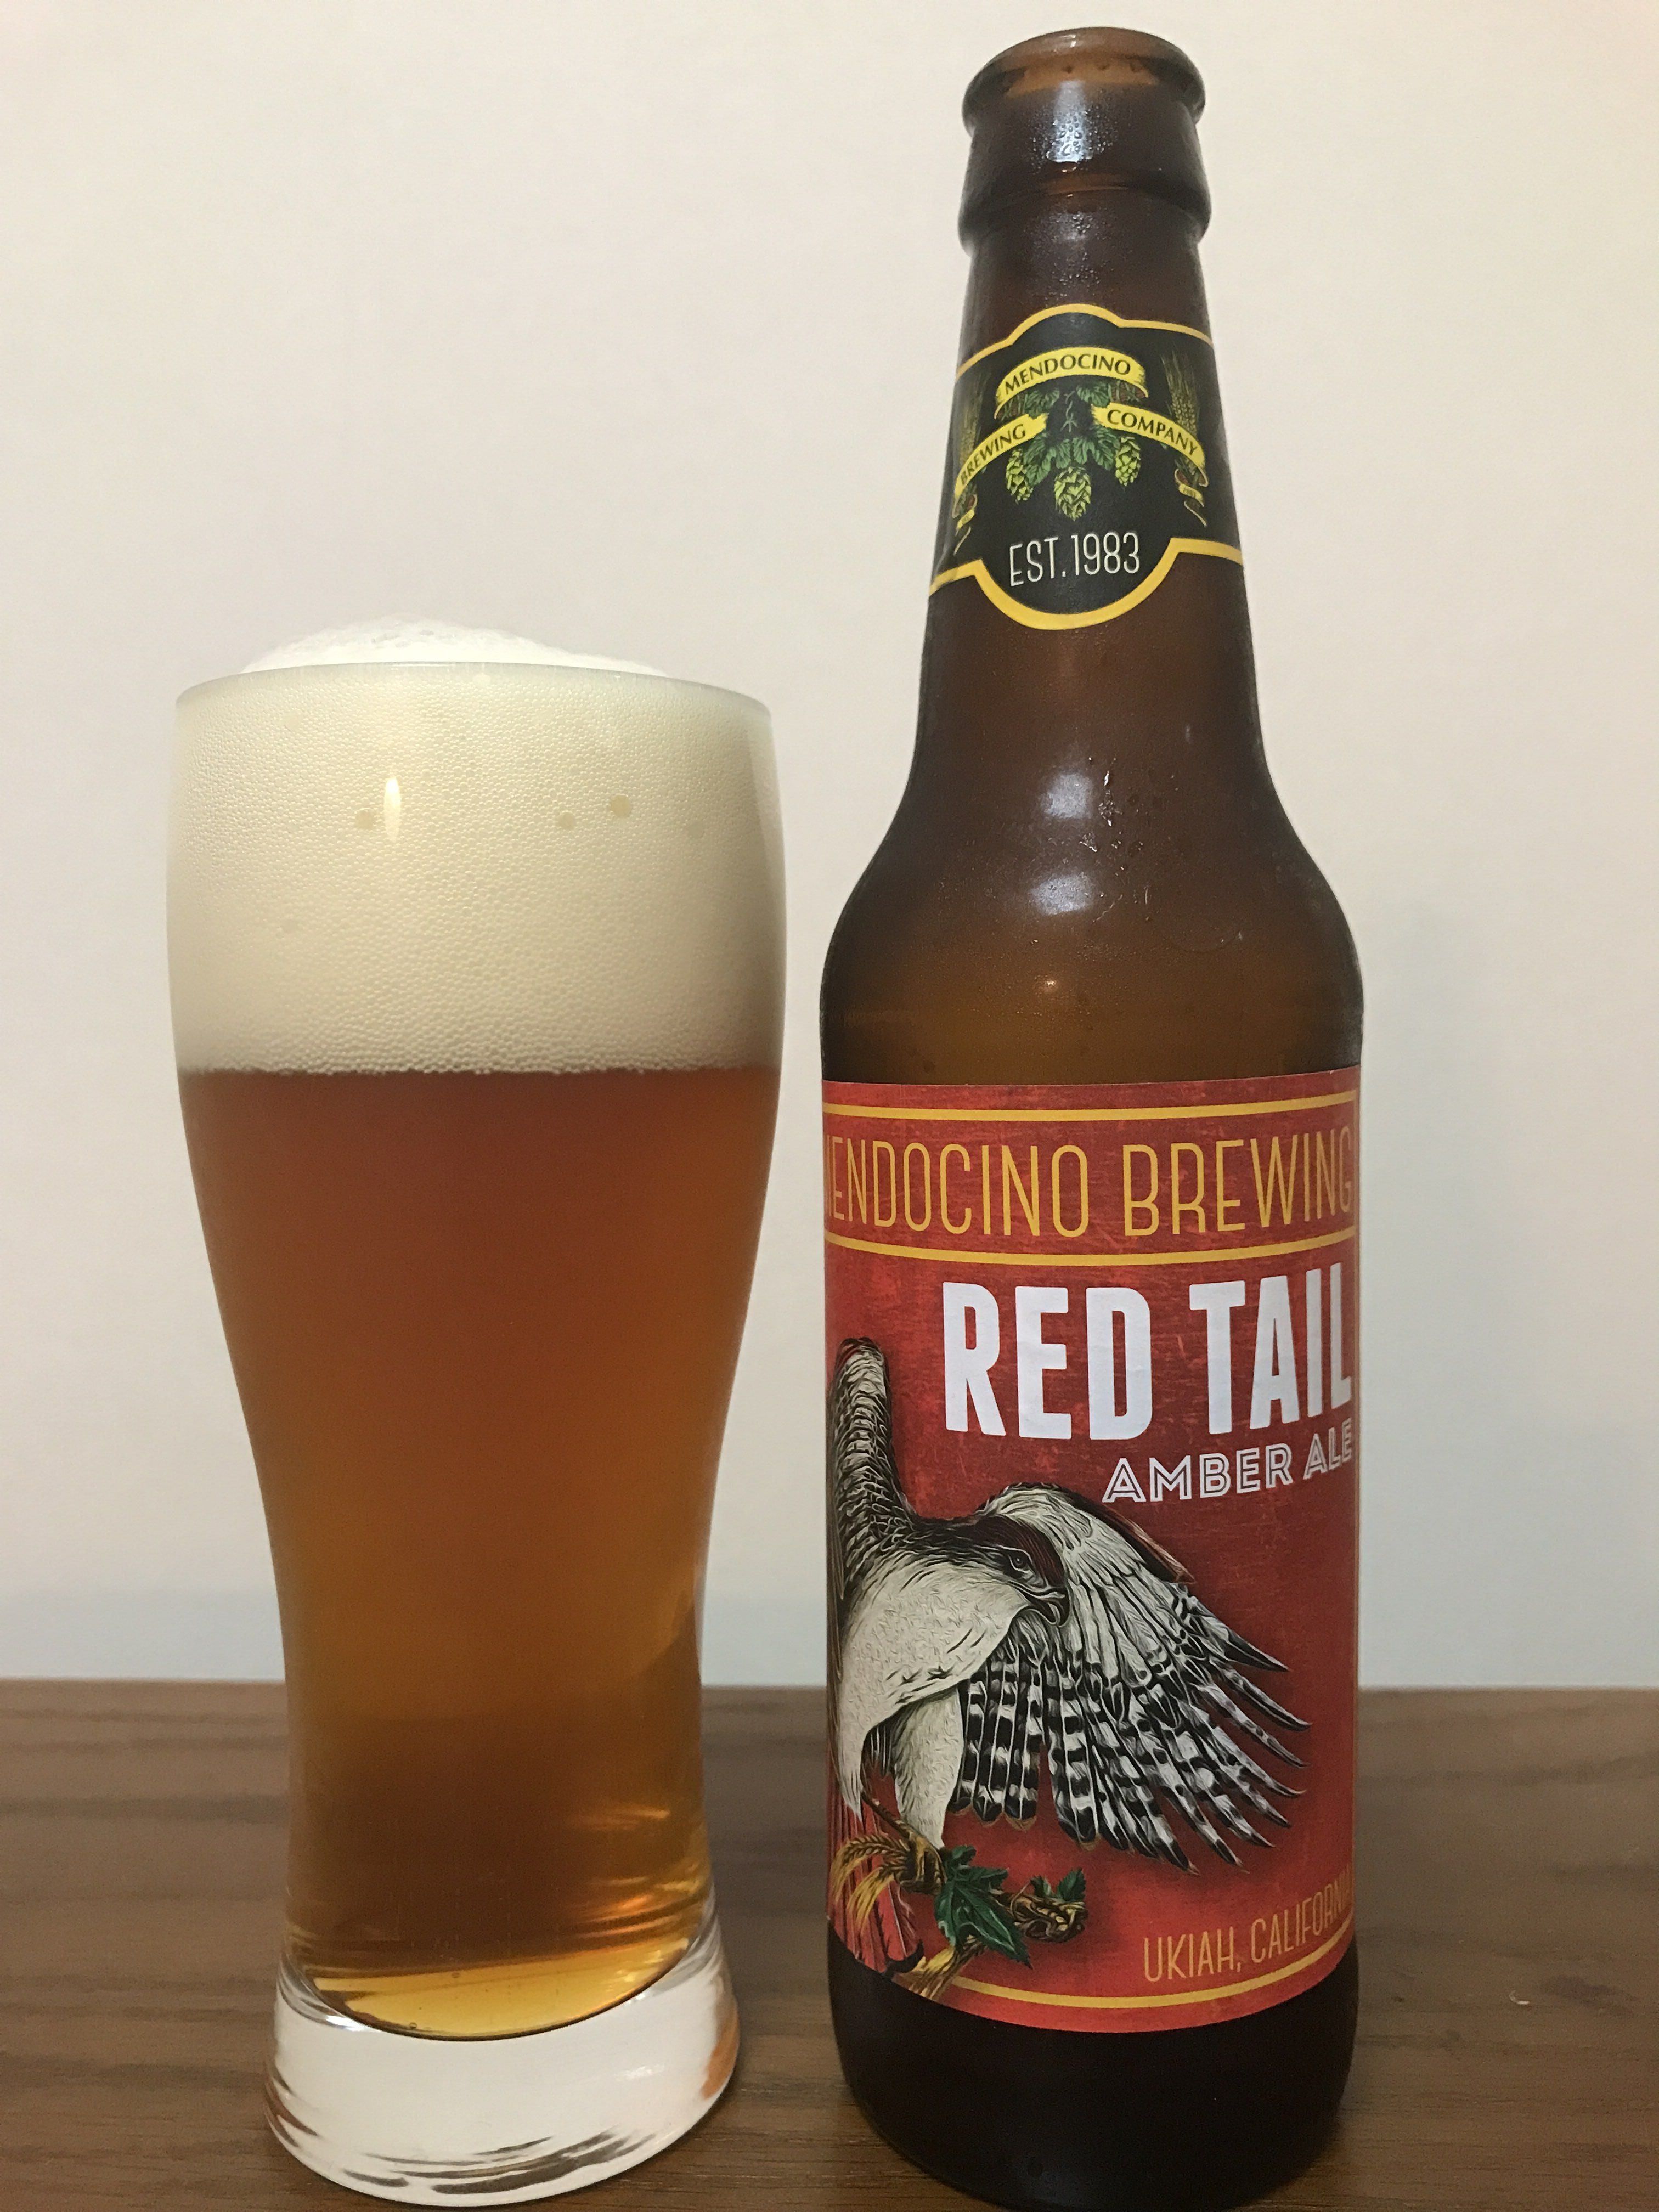 RED TAIL AMBER ALE(レッドテール アンバーエール)